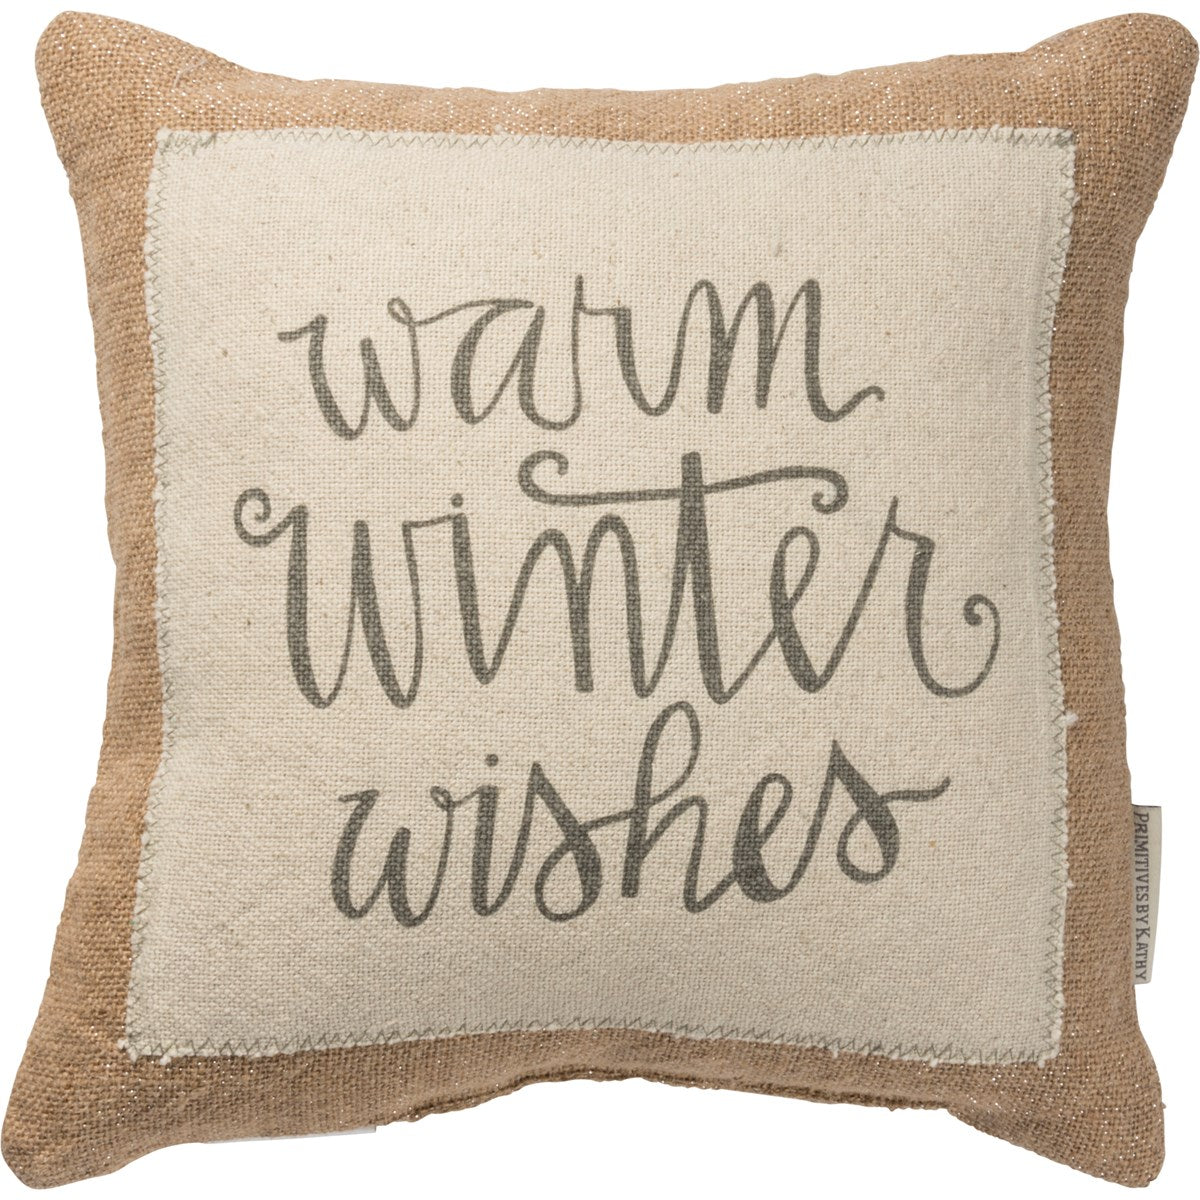 Warm Winter Wishes Pillow